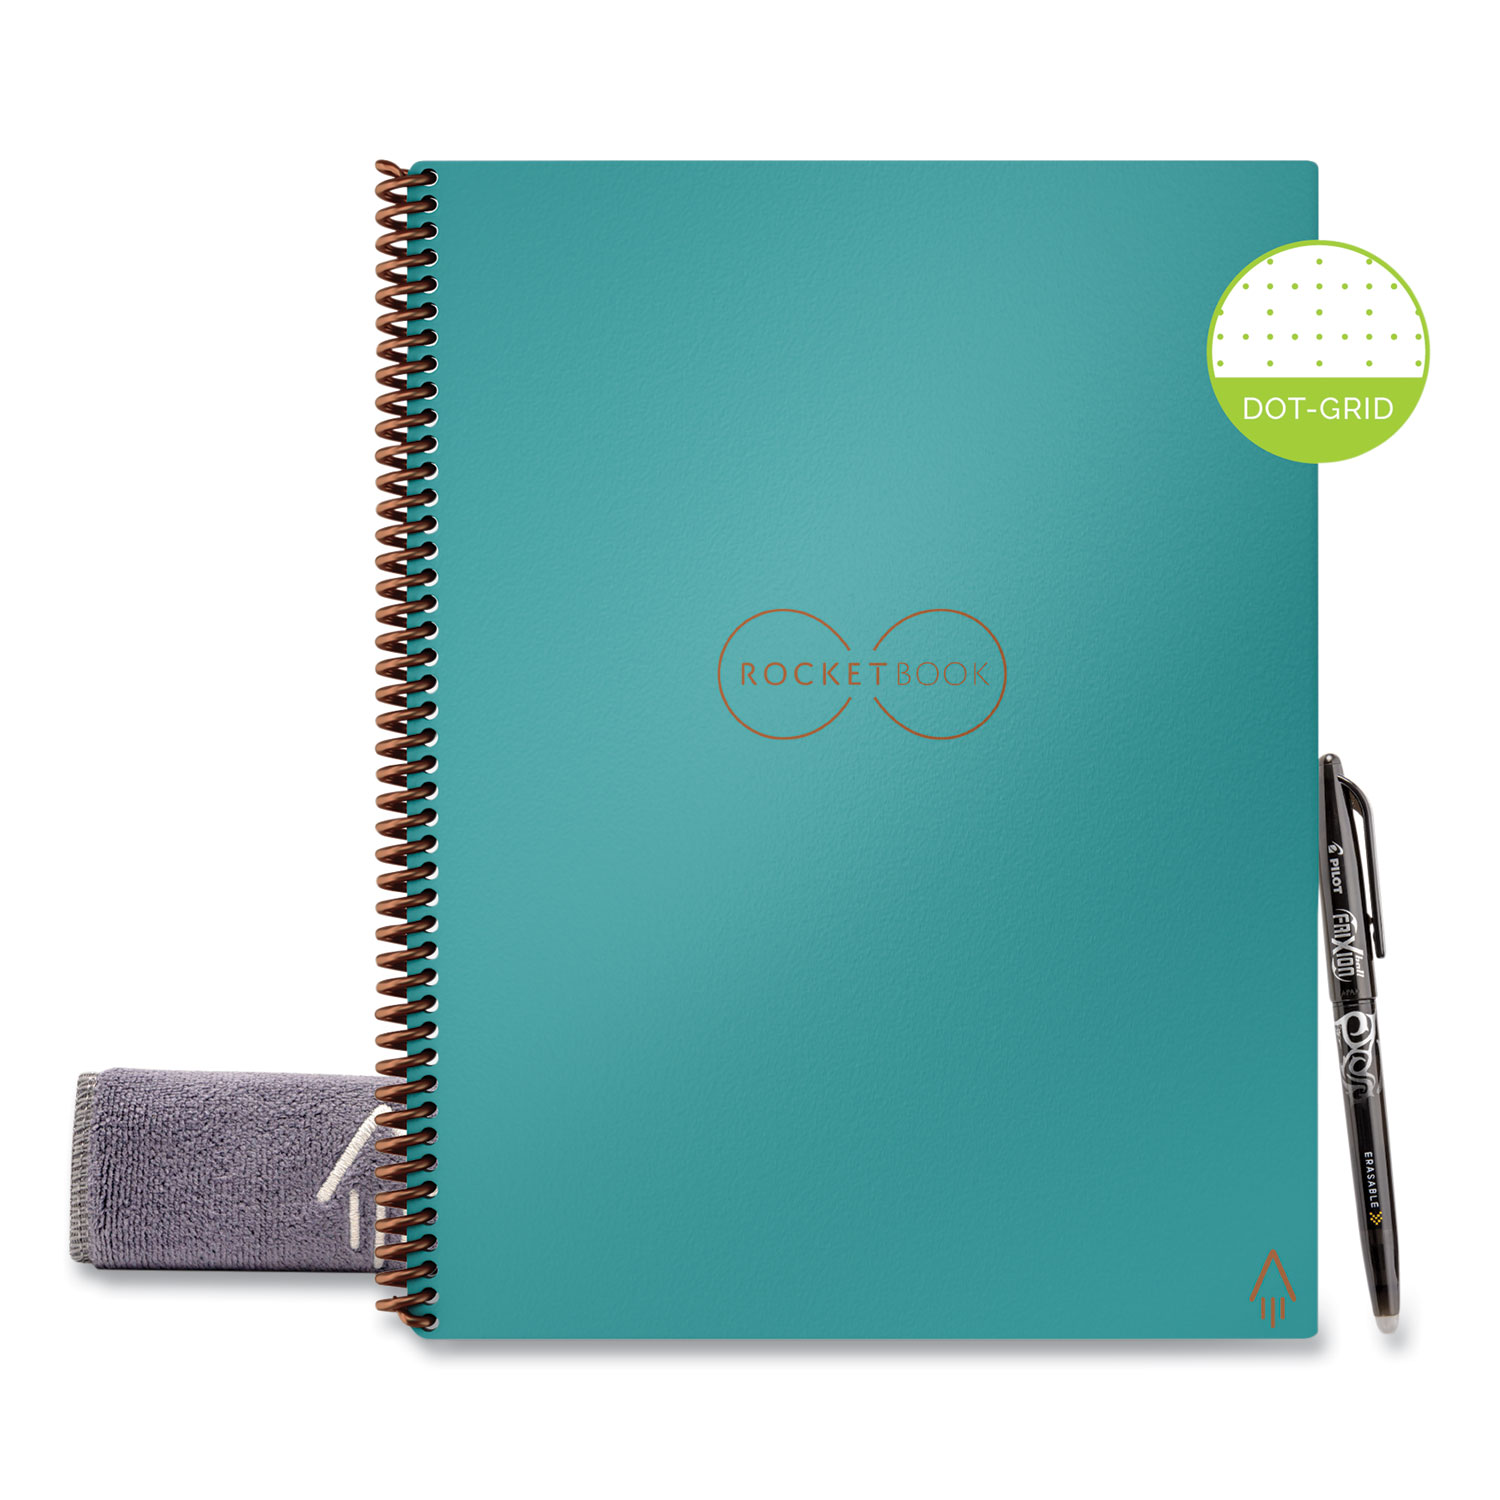  Rocketbook EVR-L-R-CCE Rocketbook Everlast Smart Reusable Notebook, Dotted Rule, Neptune Teal Cover, 8.5 x 11, 16 Sheets (RKB24328141) 